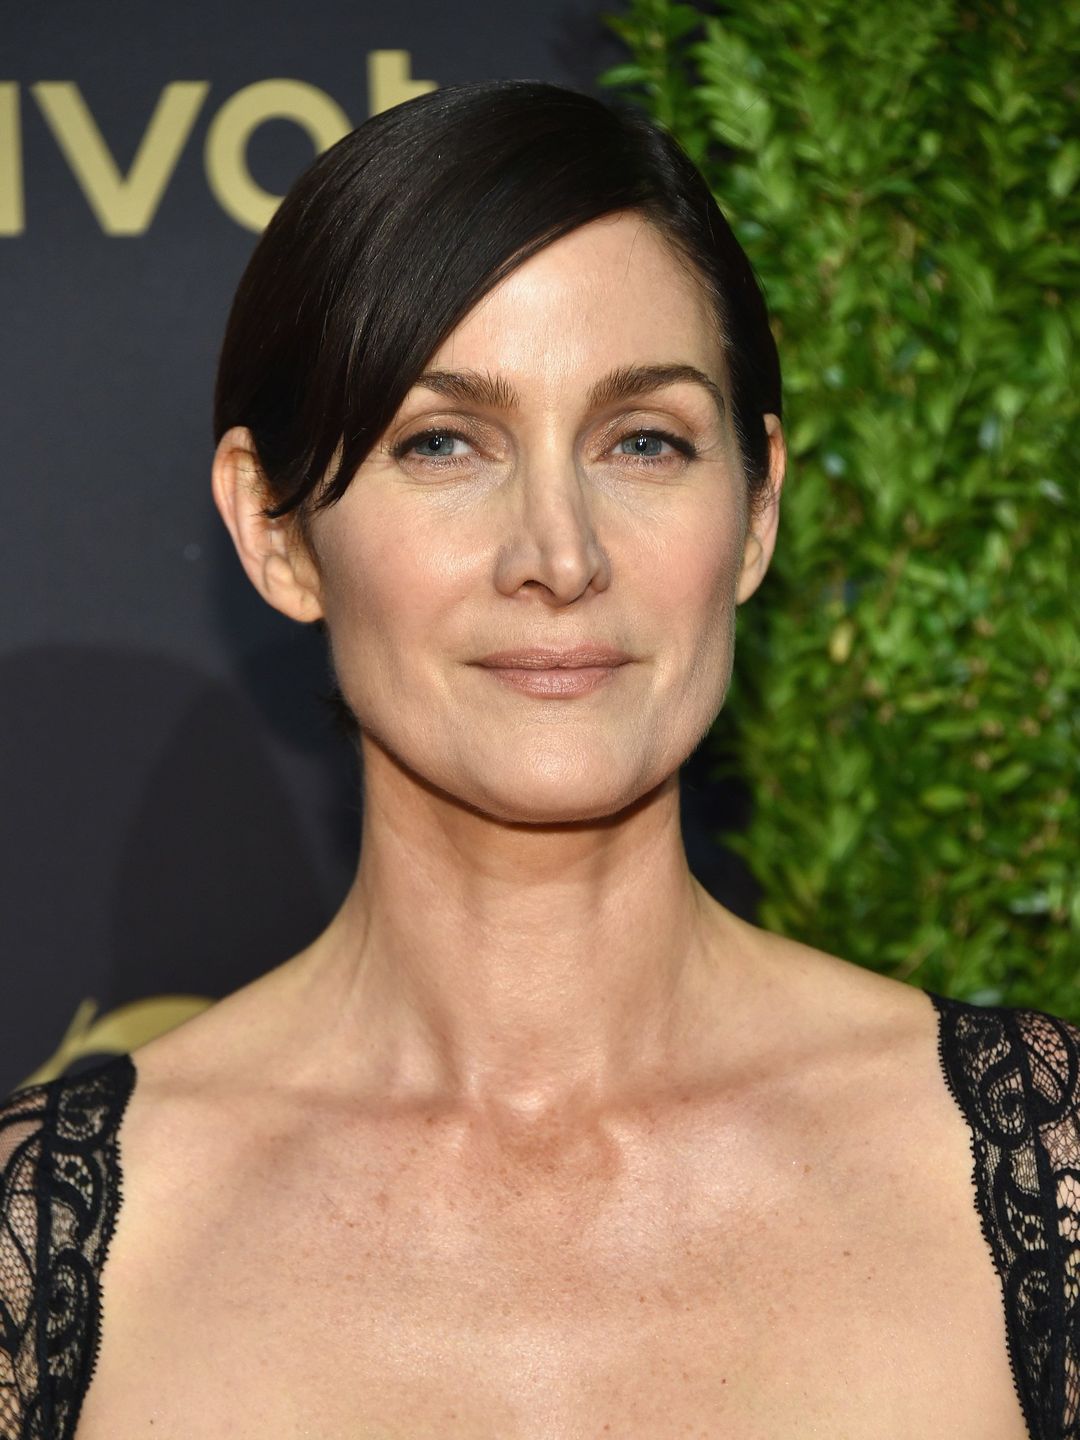 Carrie-Anne Moss her zodiac sign